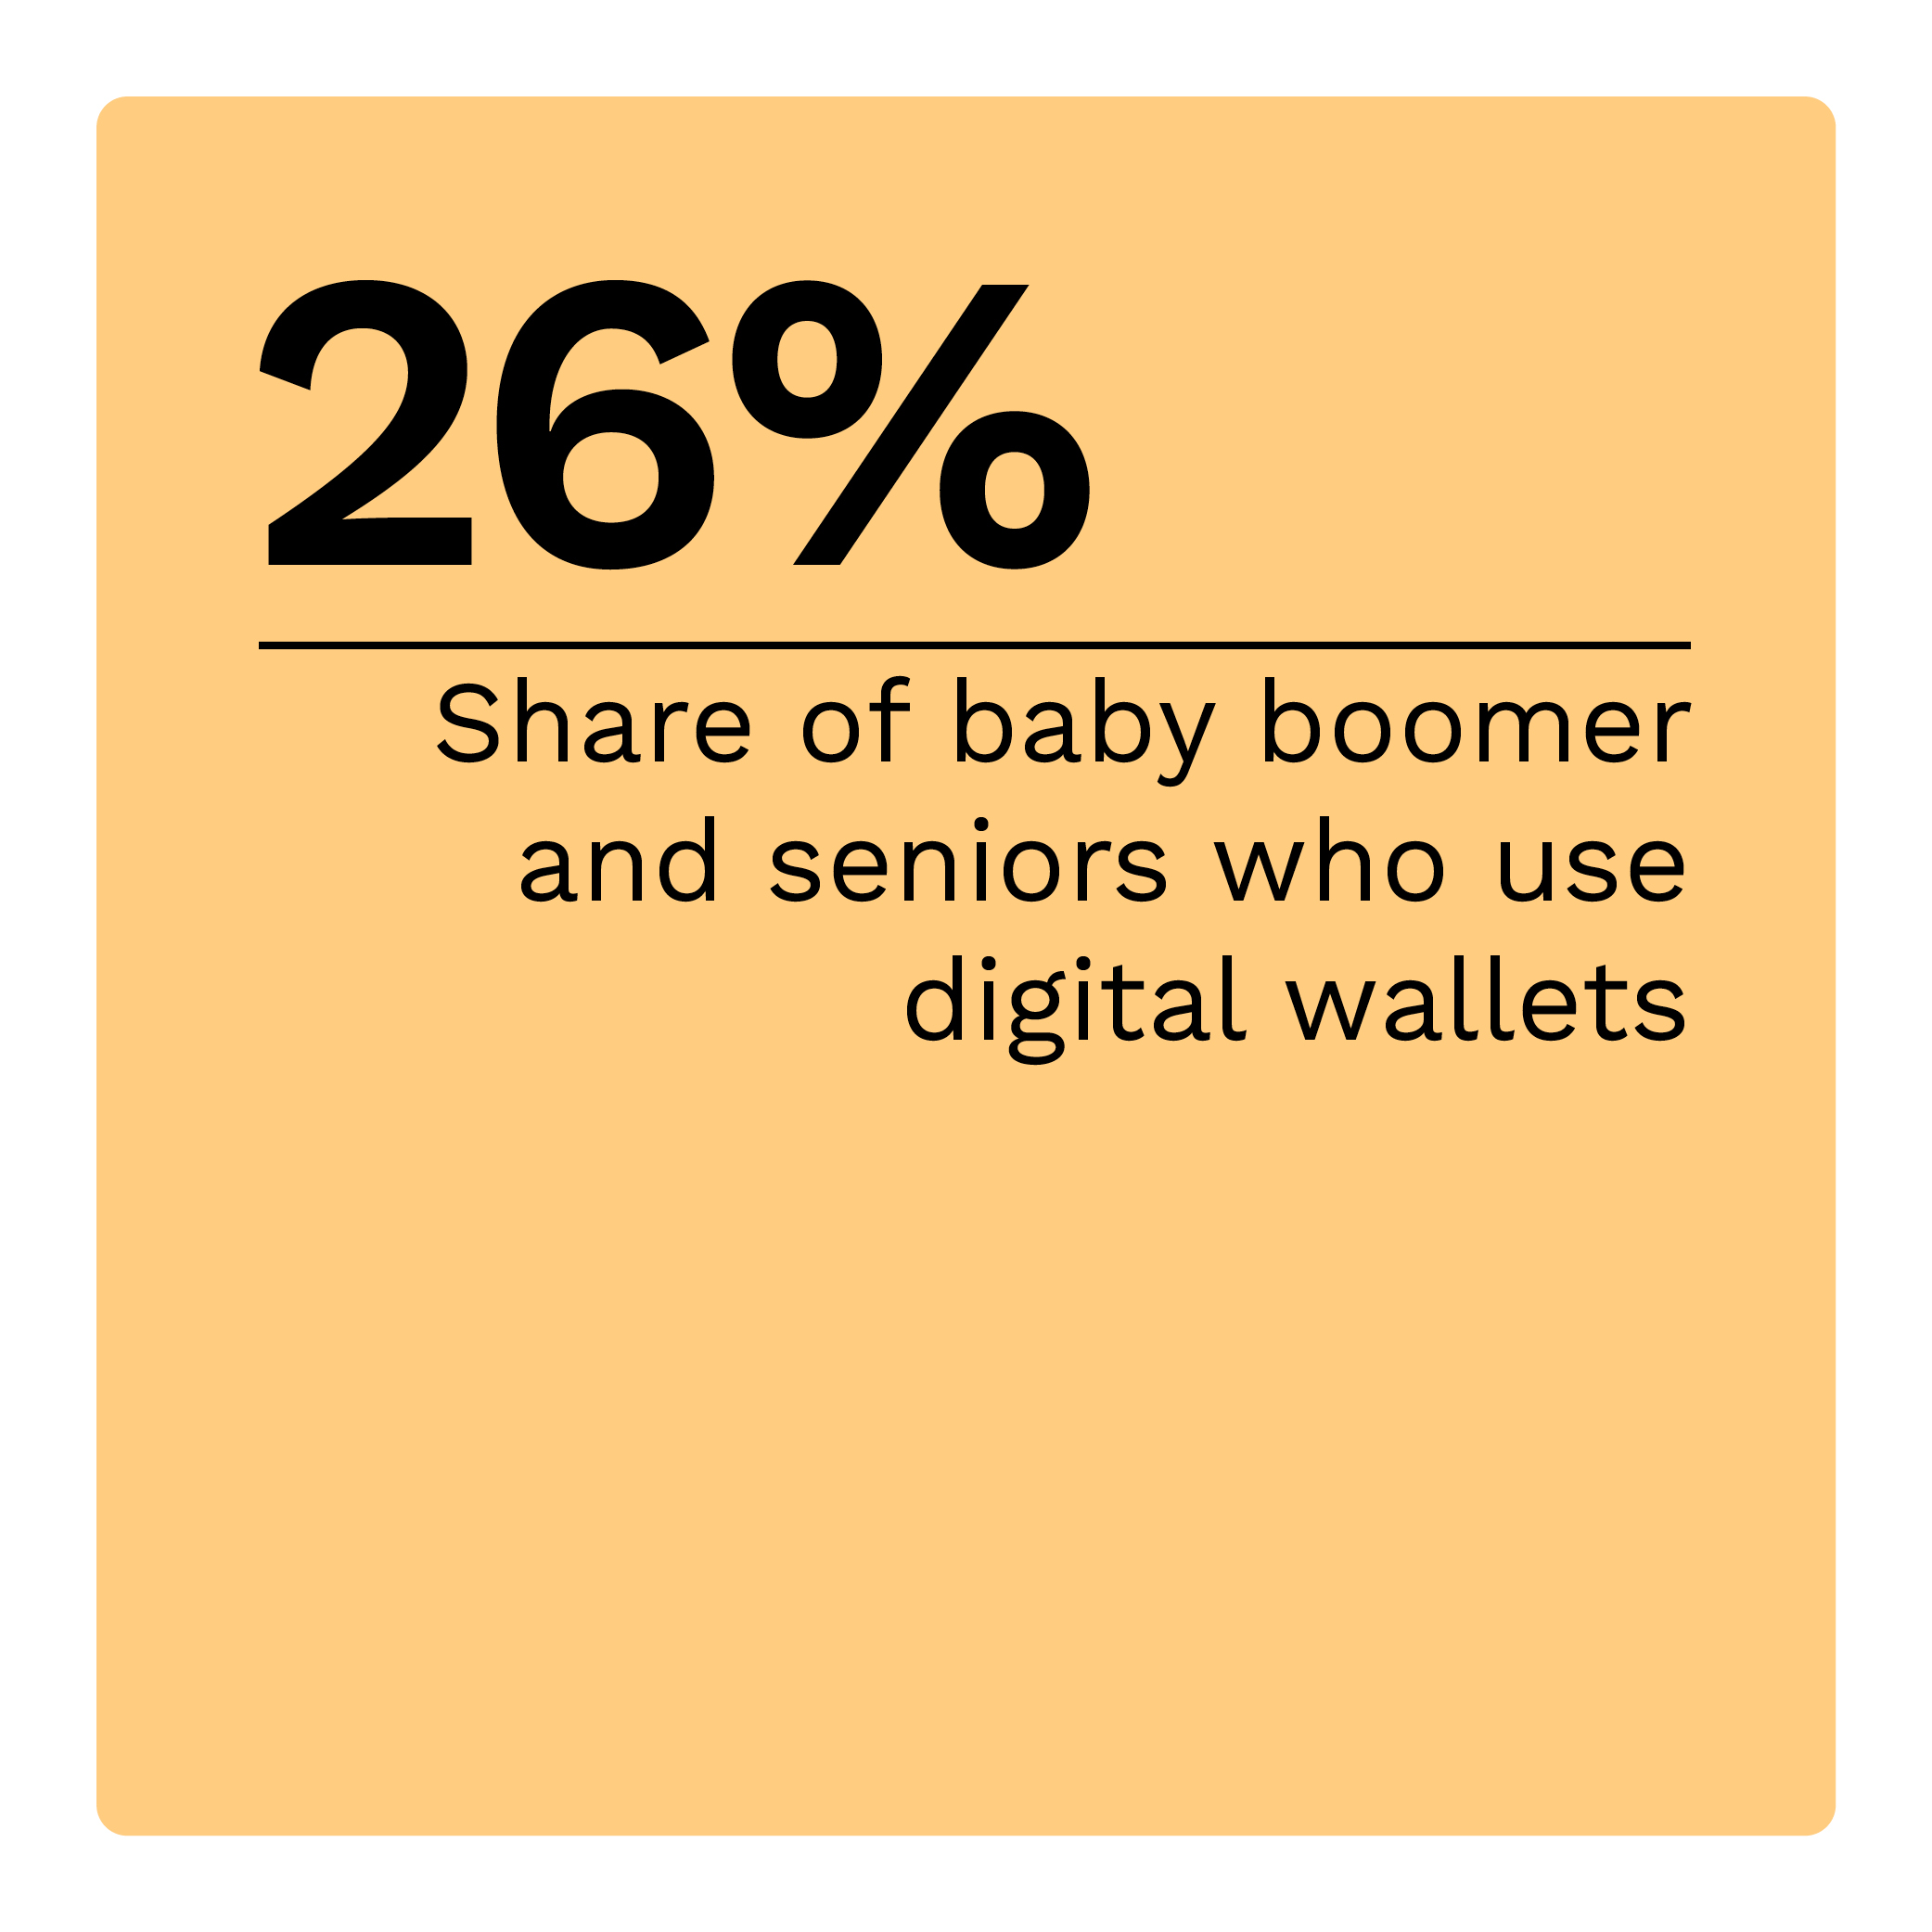 26%: Share of baby boomer and seniors who use digital wallets